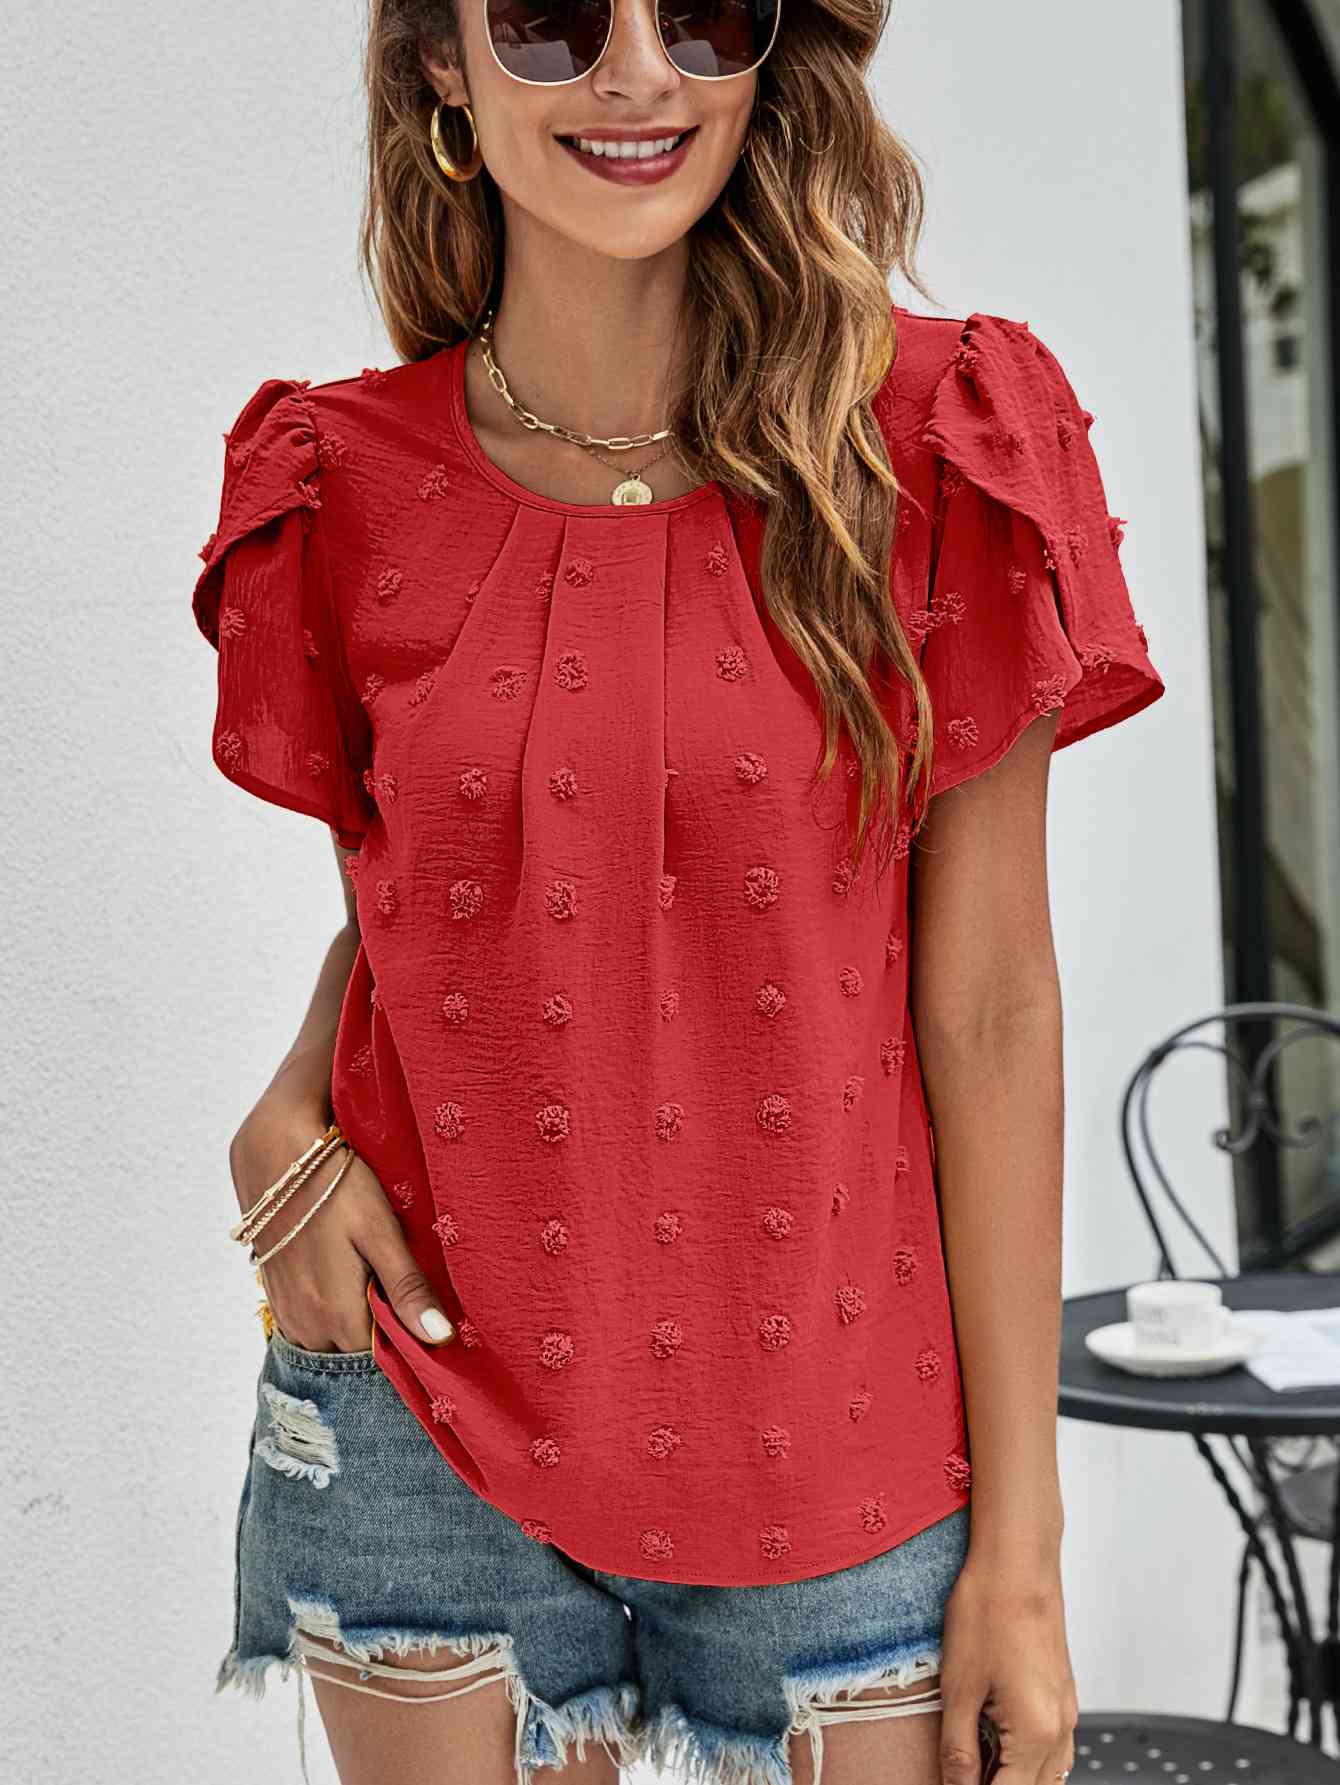 Swiss Dot Round Neck Petal Sleeve Top (10 Colors)  Krazy Heart Designs Boutique Red S 